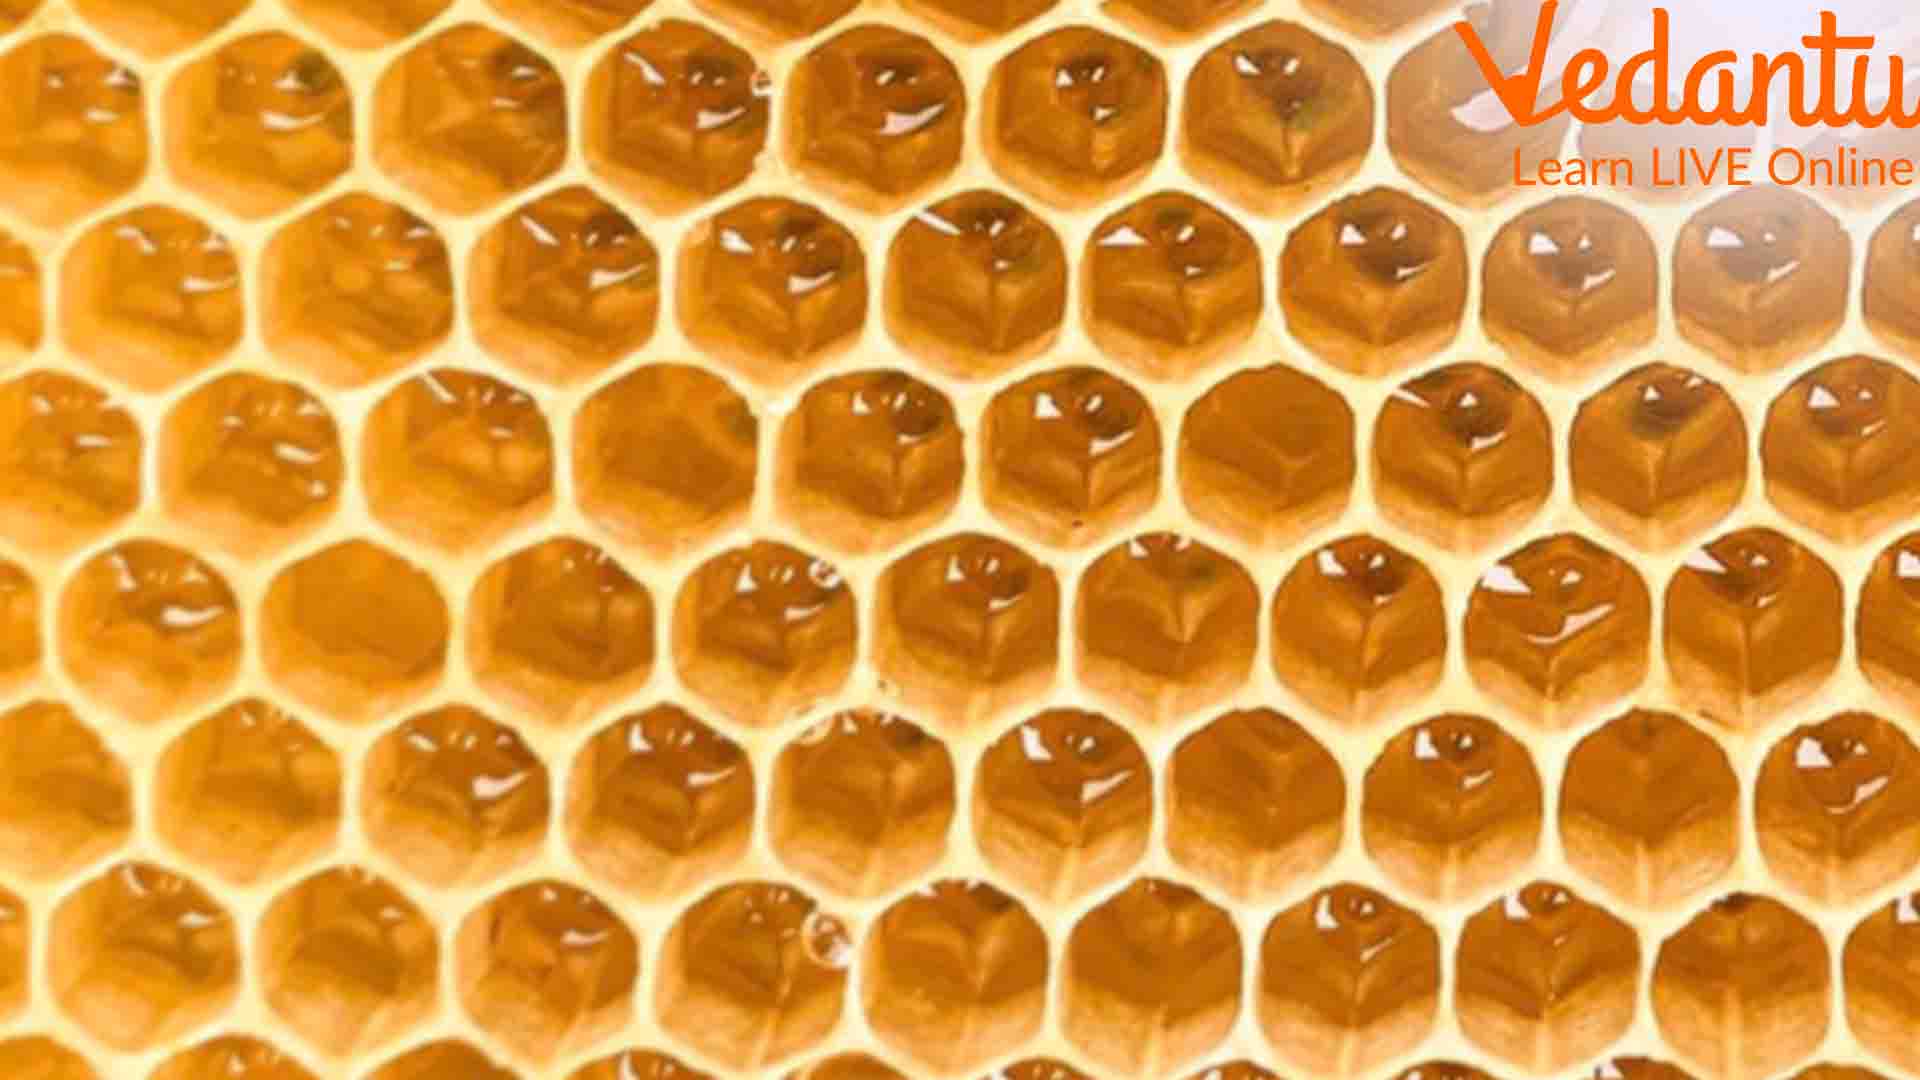 The Honeycomb Structure